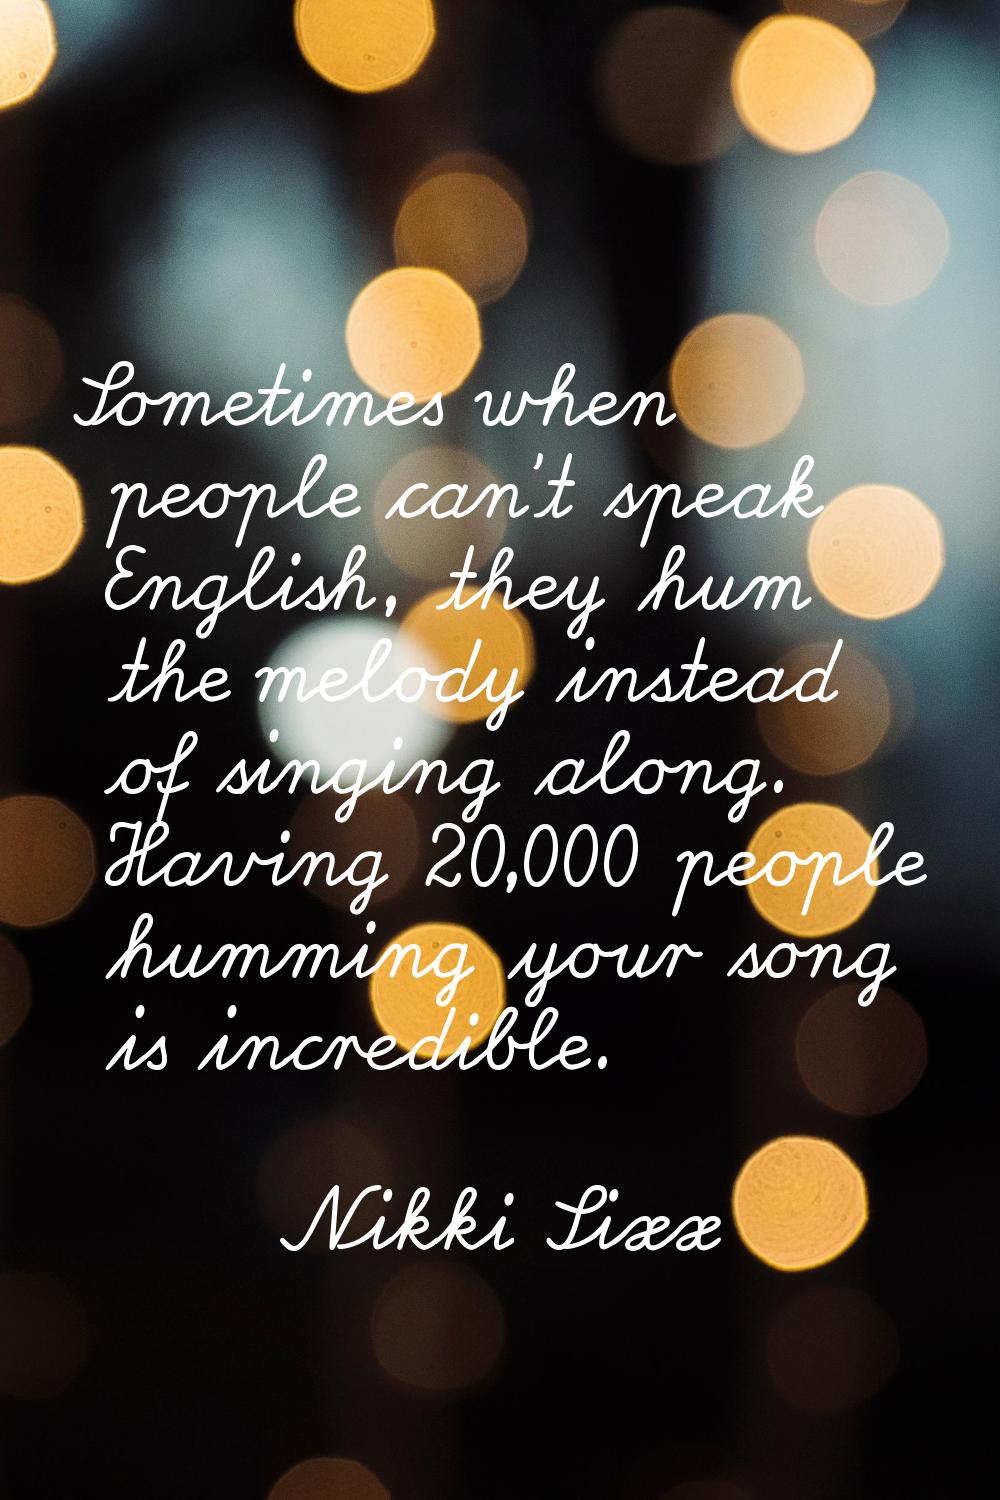 Sometimes when people can't speak English, they hum the melody instead of singing along. Having 20,